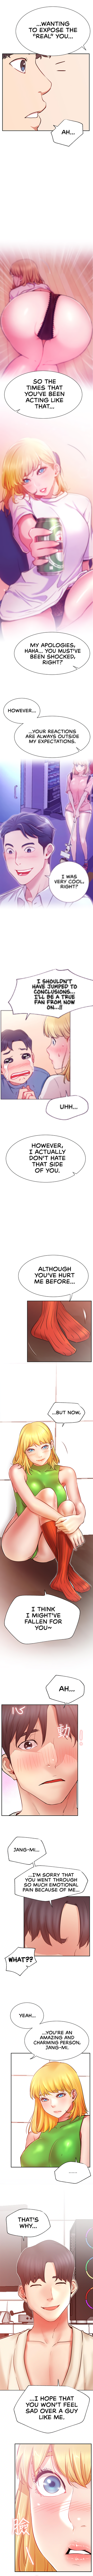 do-you-want-to-collab-chap-31-4